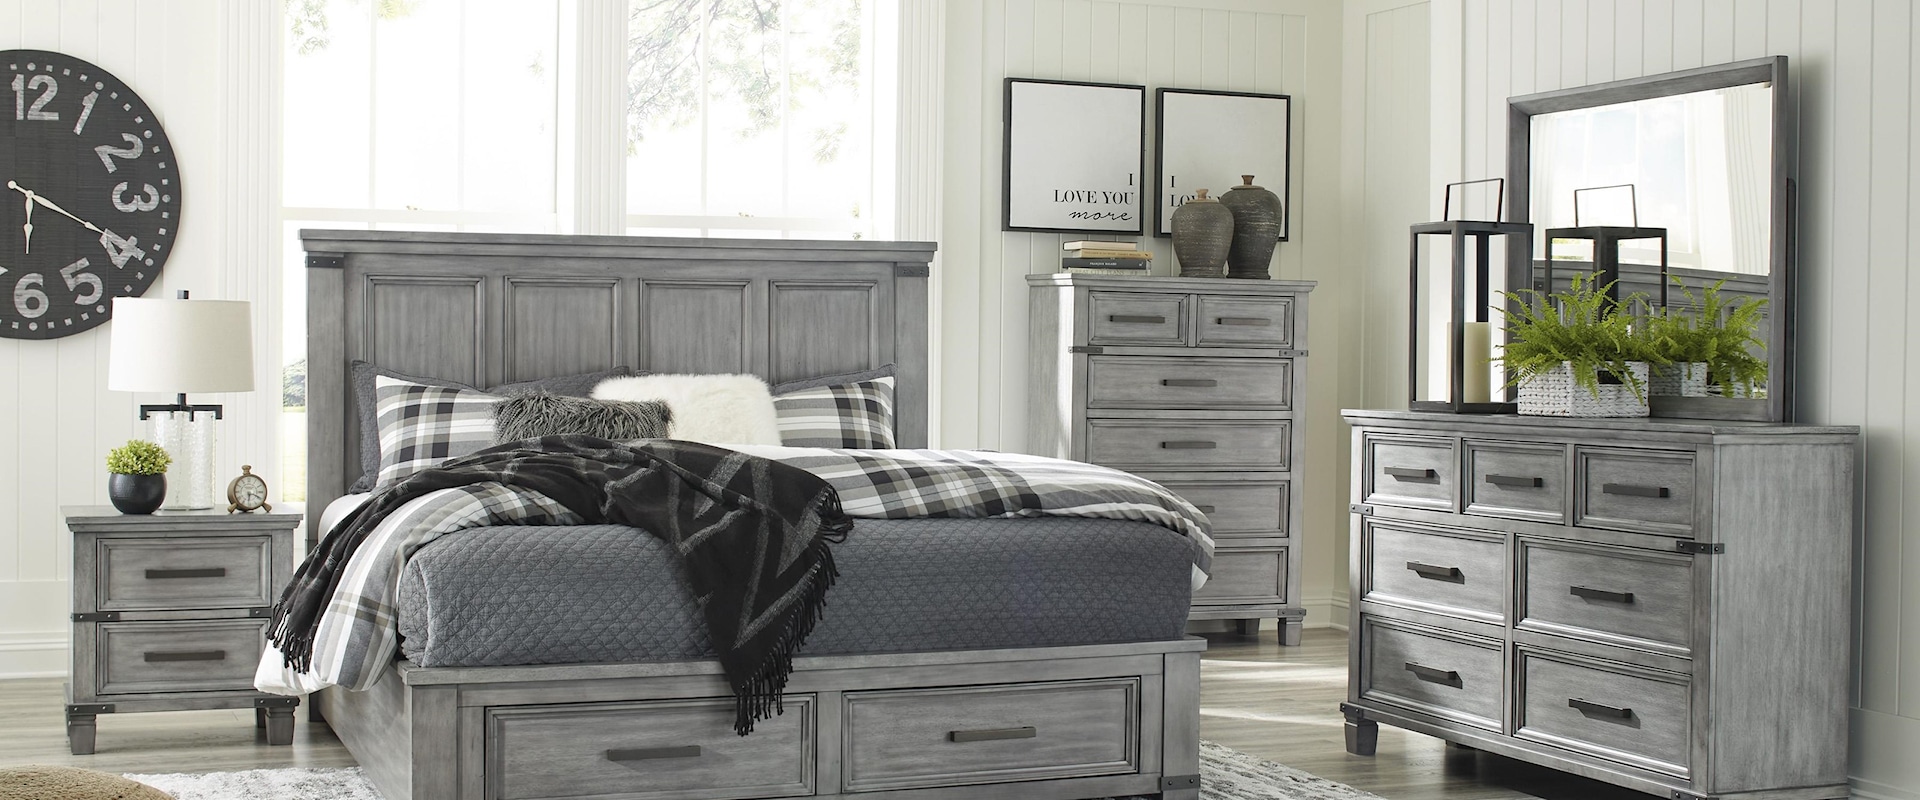 3 Piece Queen Panel Bed with Footboard Storage, 7 Drawer Dresser, Mirror, 2 Drawer Nightstand and 5 Drawer Chest Set